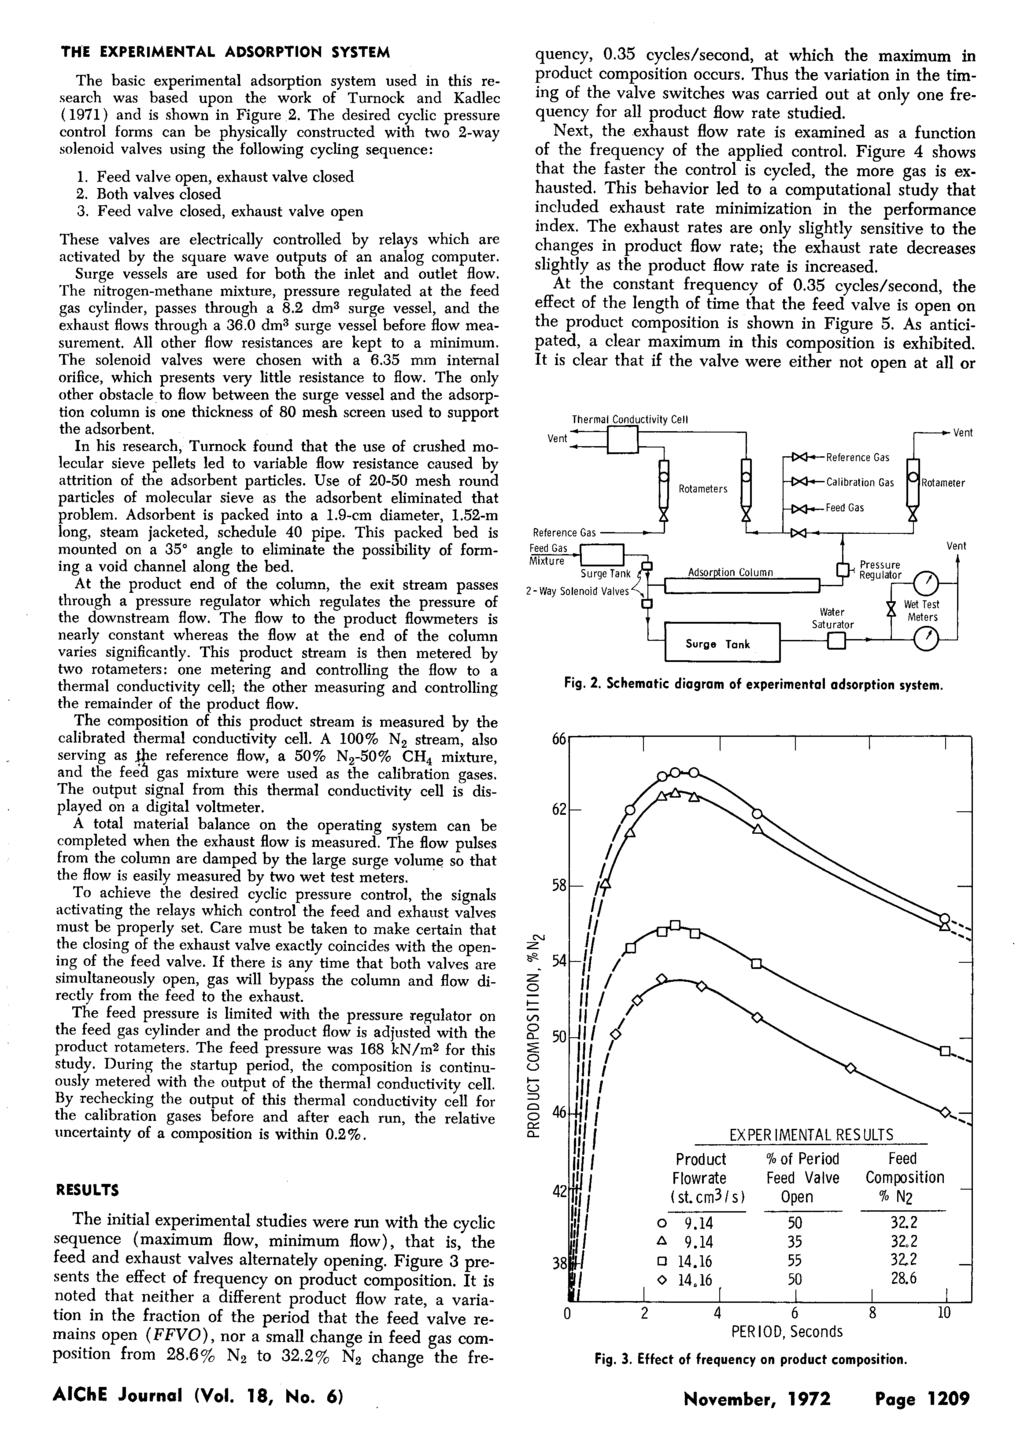 THE EXPERMENTAL ADSORPTON SYSTEM The basi experimental adsorption system used in this researh was based upon the work of Turnok and Kadle (1971) and is shown in Figure 2.